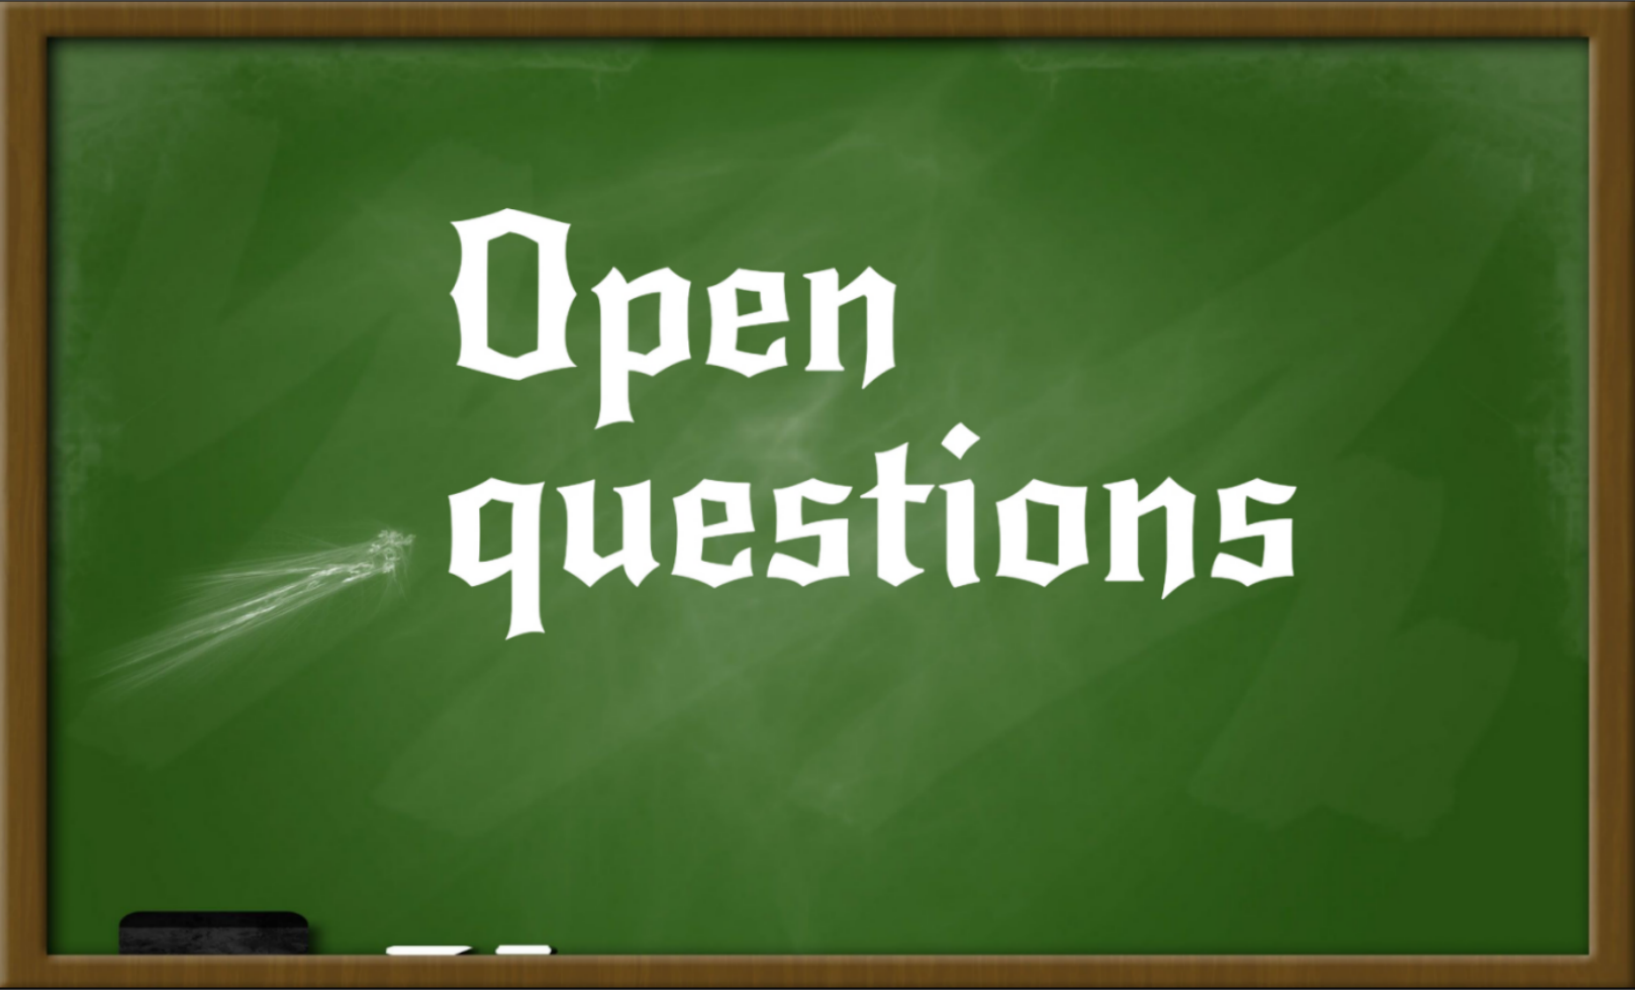 open questions